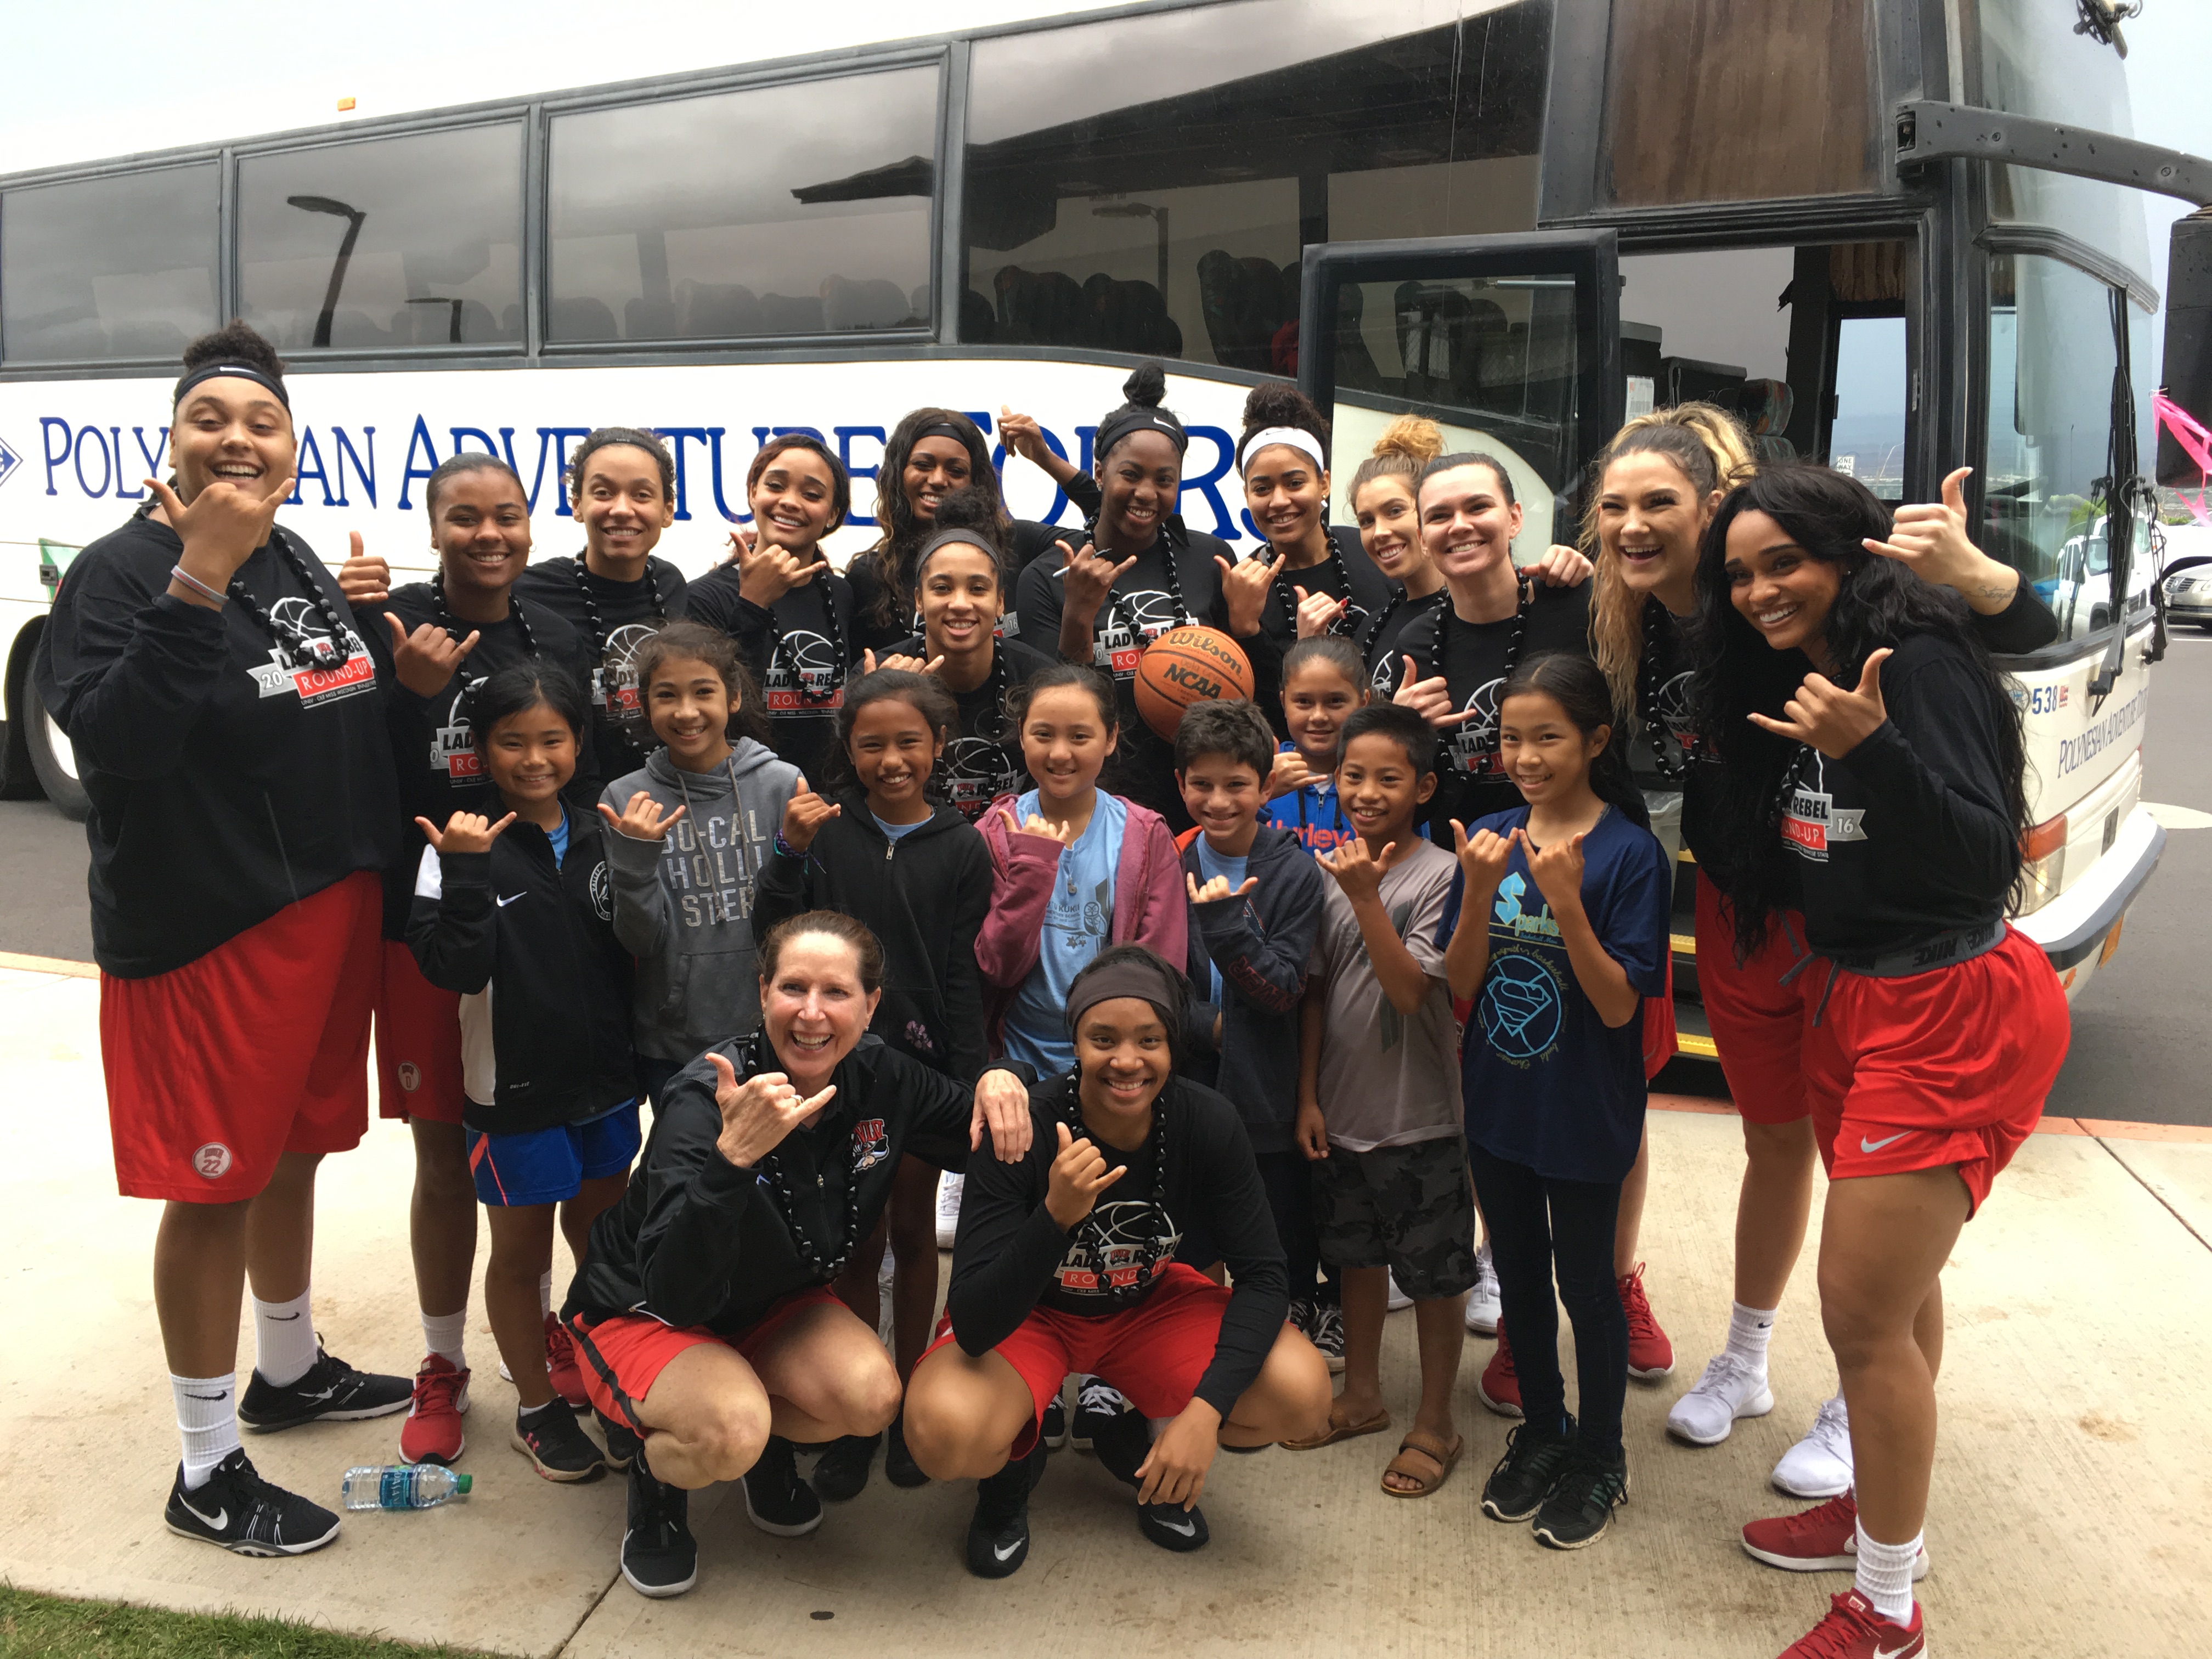 UNLV’s visit to Puʻu Kukui Elementary being greeted by students from the school’s welcoming committee. PC: basketballMAUI